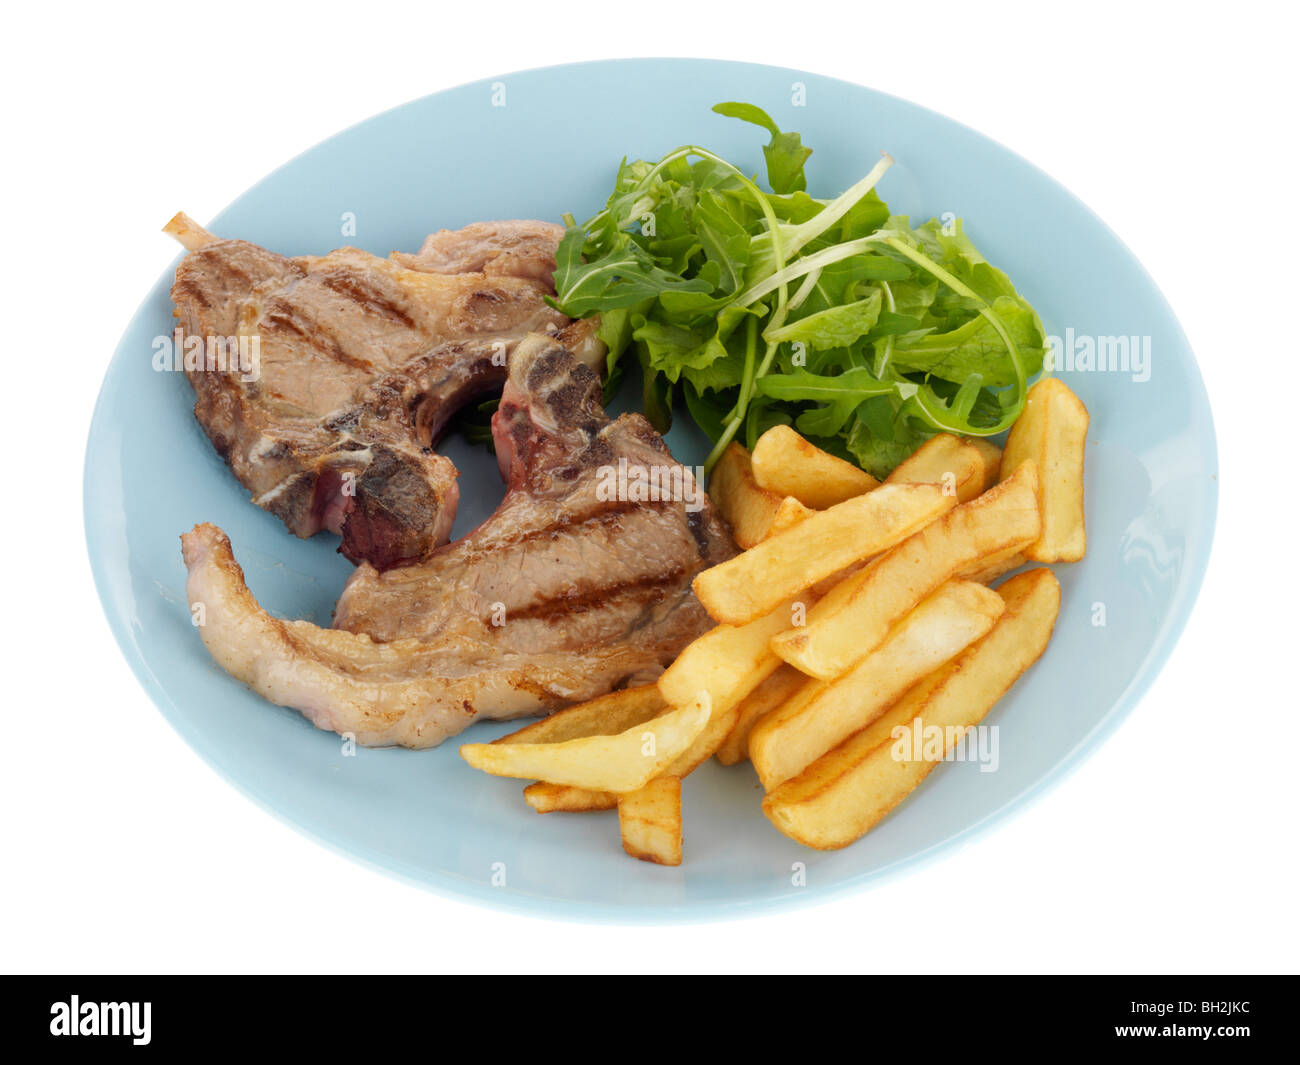 Lamb Chops with Chips Stock Photo